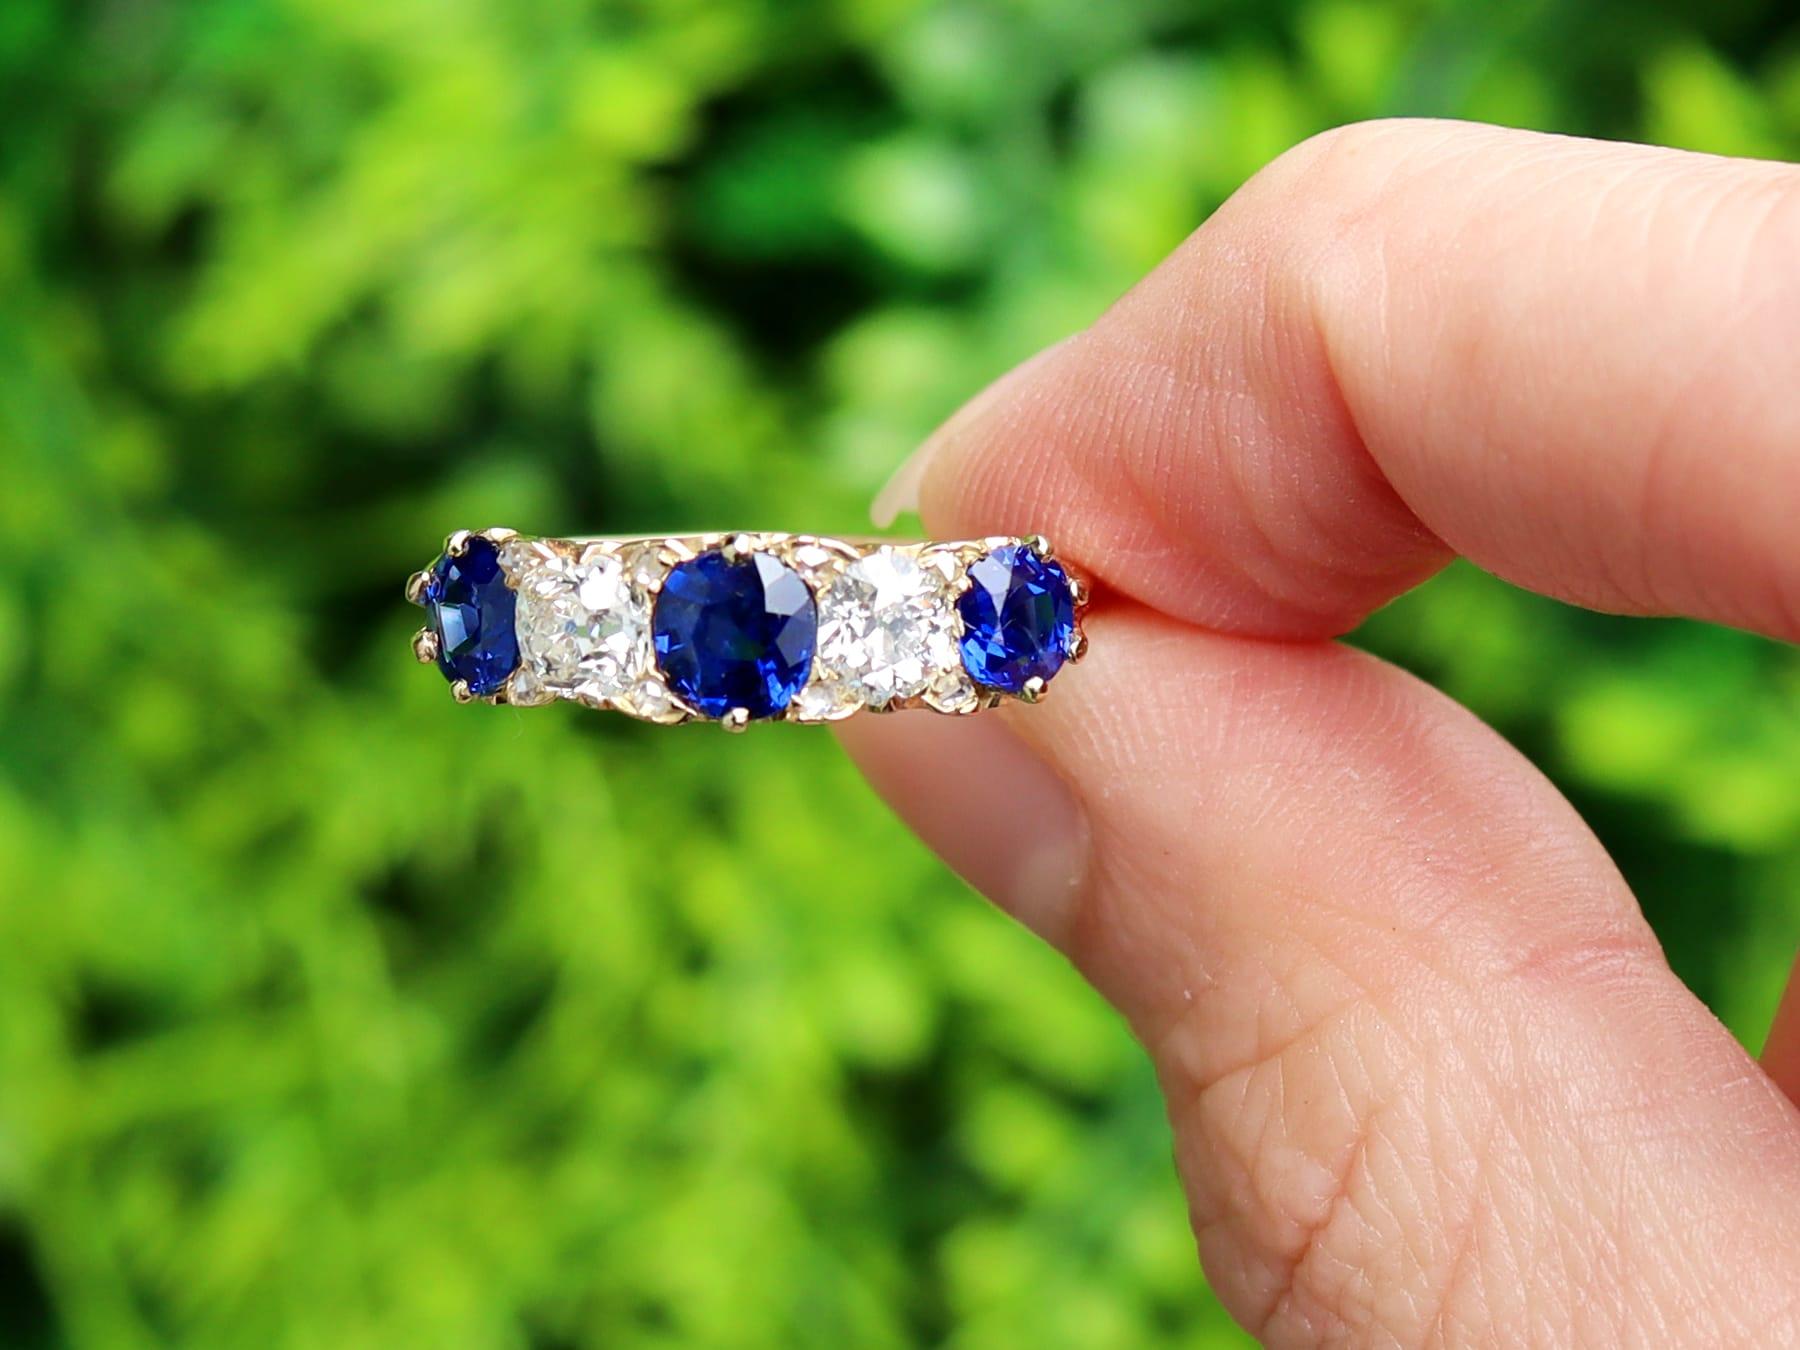 A stunning, fine and impressive antique 1.30 carat blue sapphire and 1.08 carat diamond, 18 karat yellow gold ring; part of our diverse collection of five stone rings.

This stunning, fine and impressive sapphire and diamond ring has been crafted in